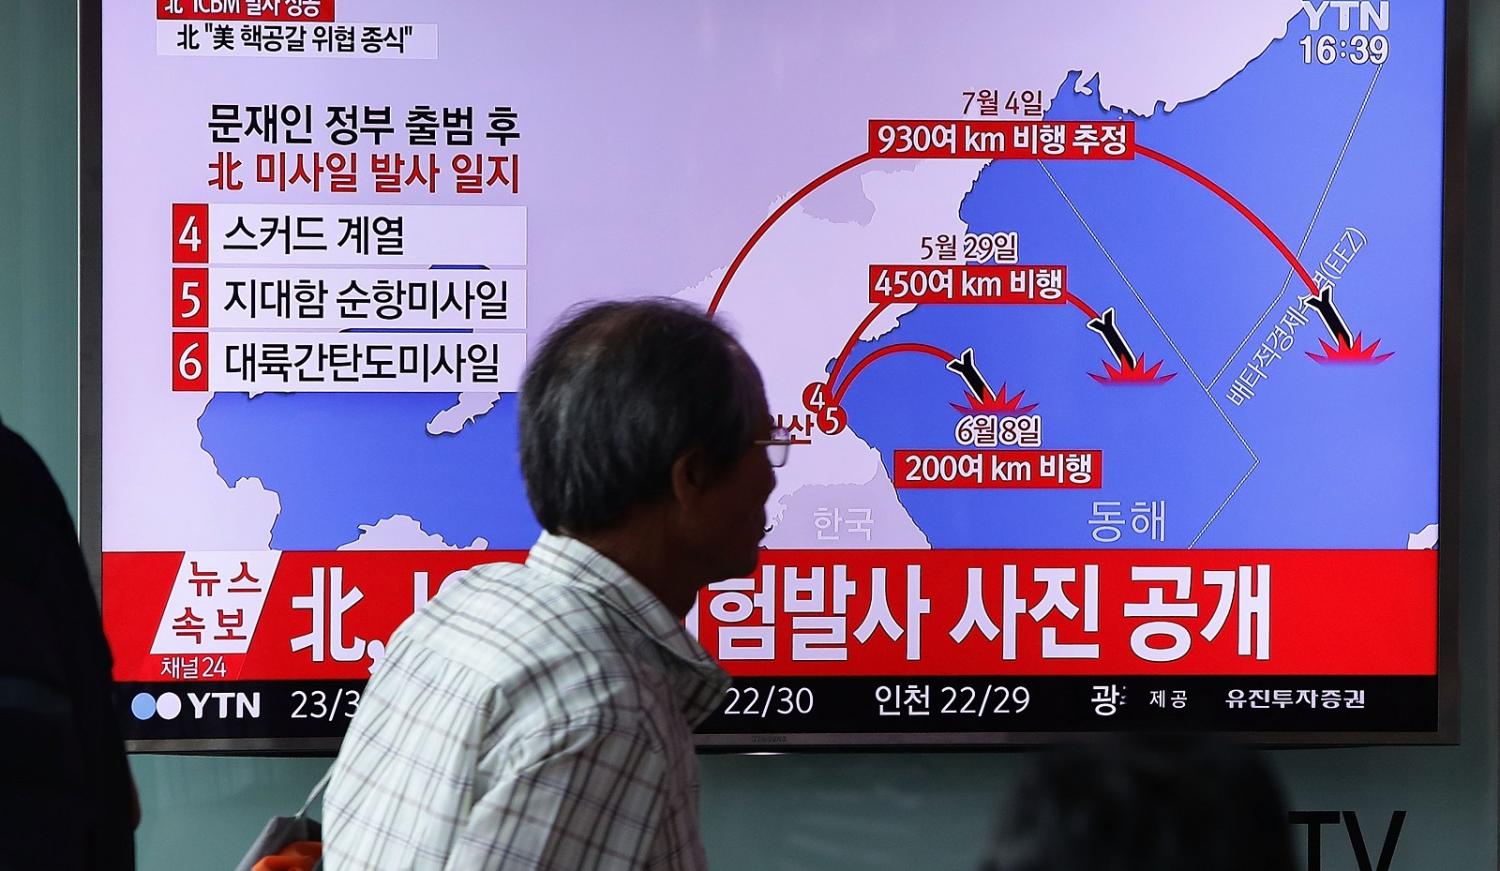 A South Korean television report on North Korea's July missile launch into Japanese waters (Photo: Chung Sung-Jun/Getty Images)